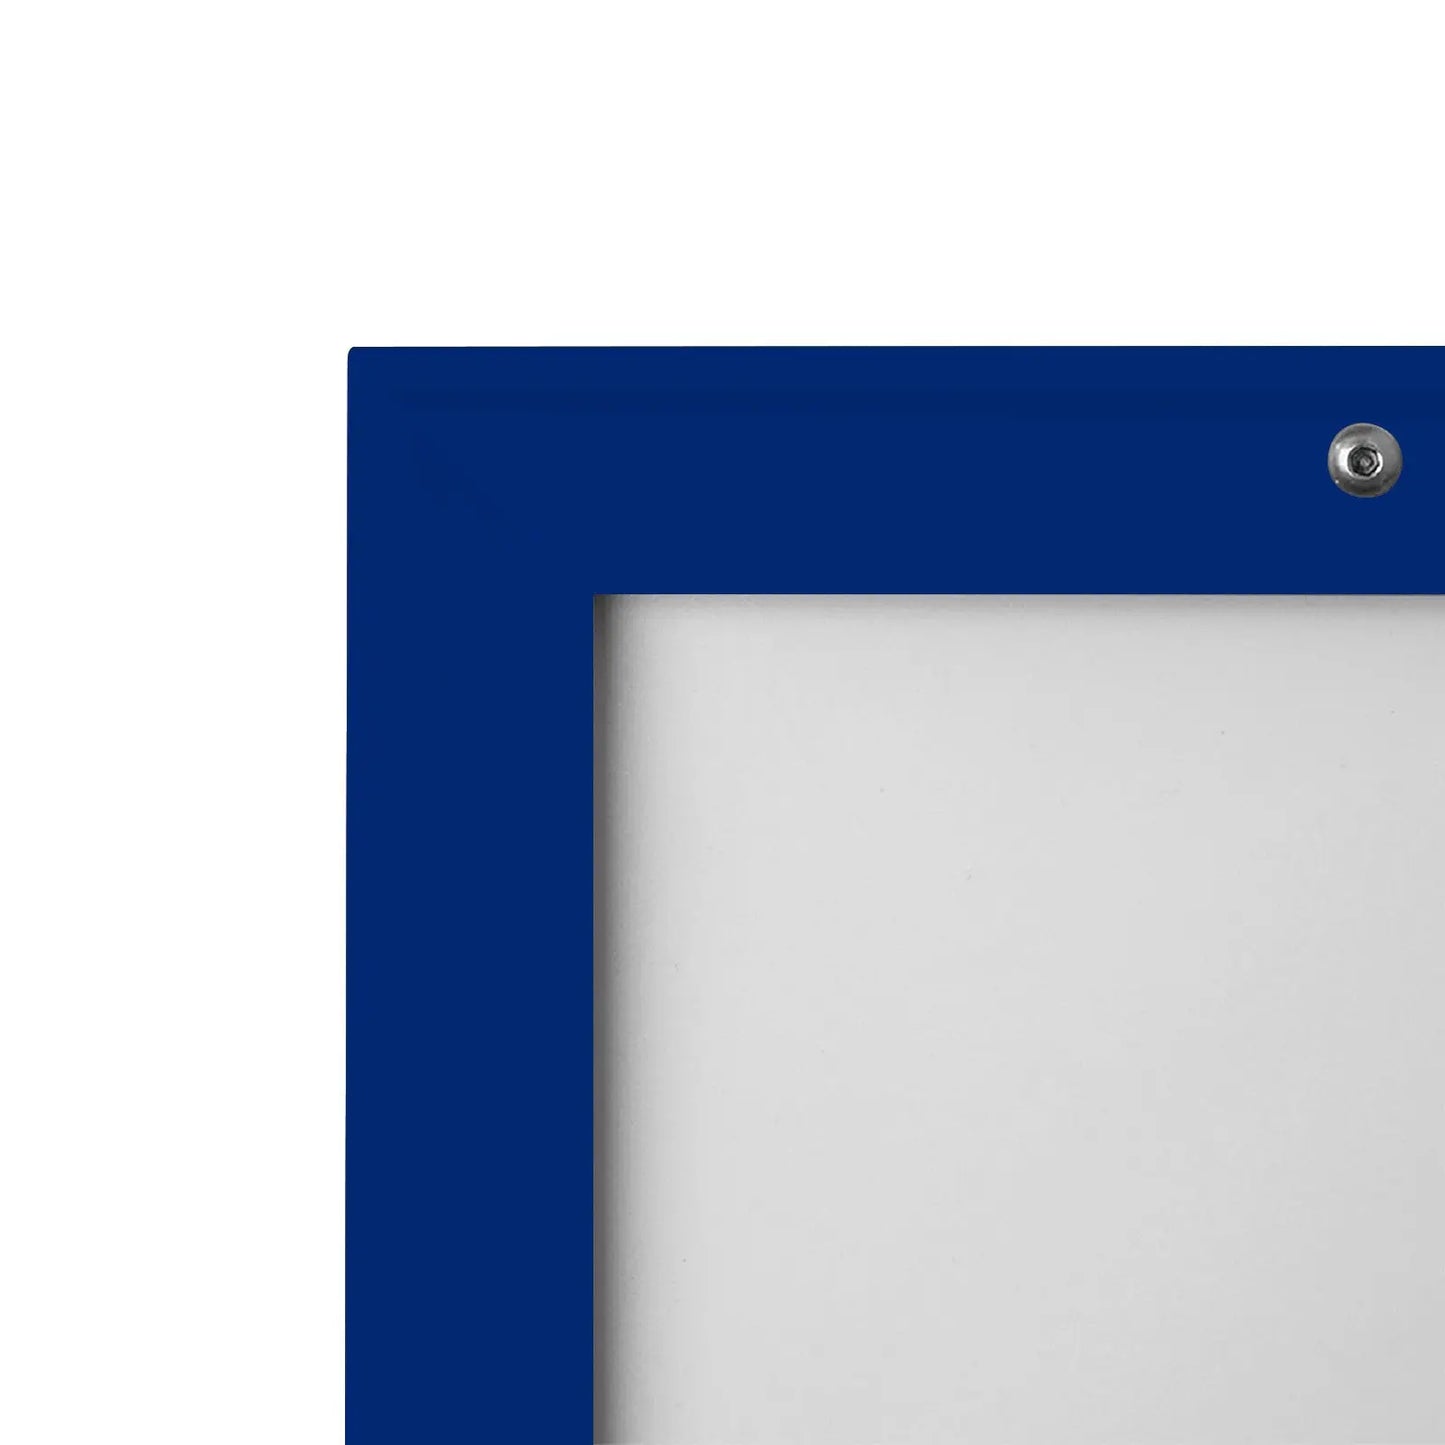 Blue locking snap frame poster size 27X41 - 1.25 inch profile - Snap Frames Direct